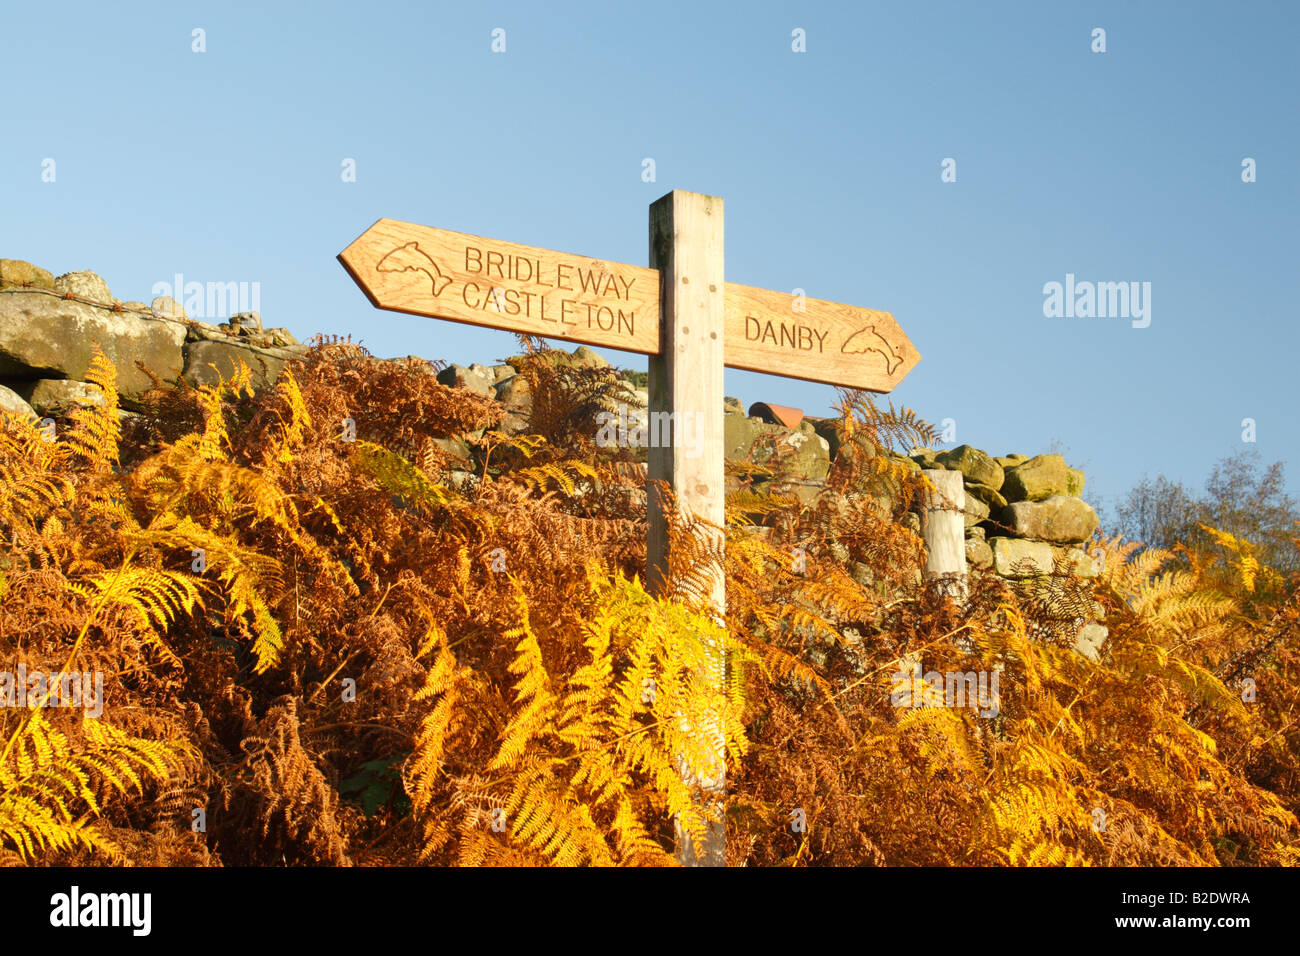 Bridleway sign on the Esk Valley Walk route between Castleton and Danby against a stone wall and golden bracken with a blue sky Stock Photo